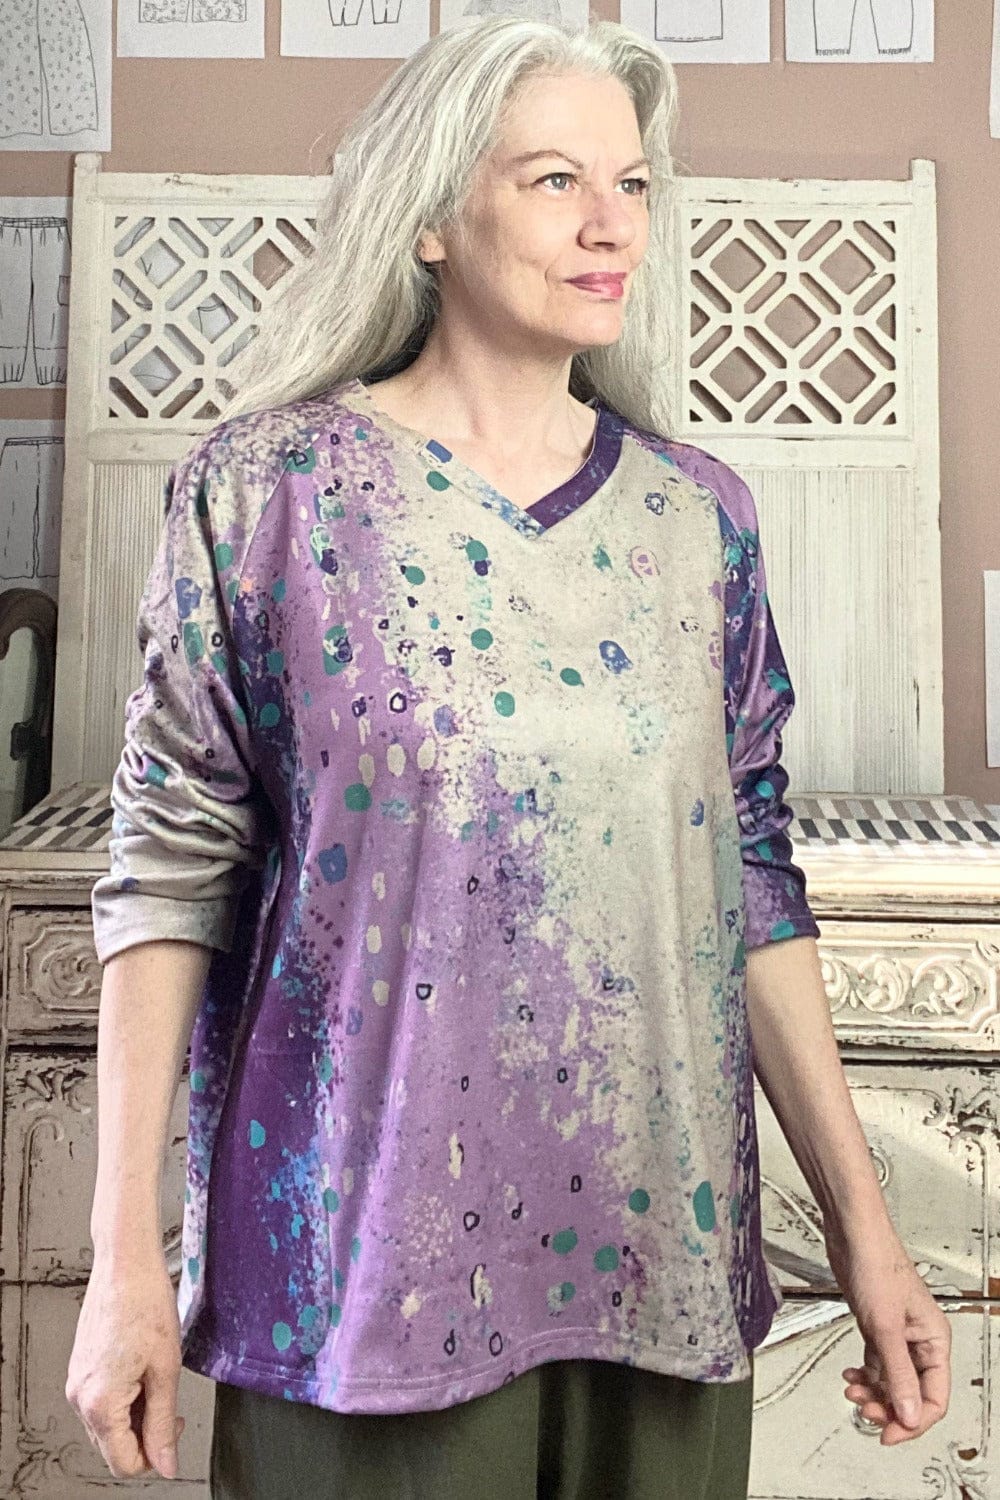 V neck women's sweater with spottoned purple design worn on a woman with long grey hair.